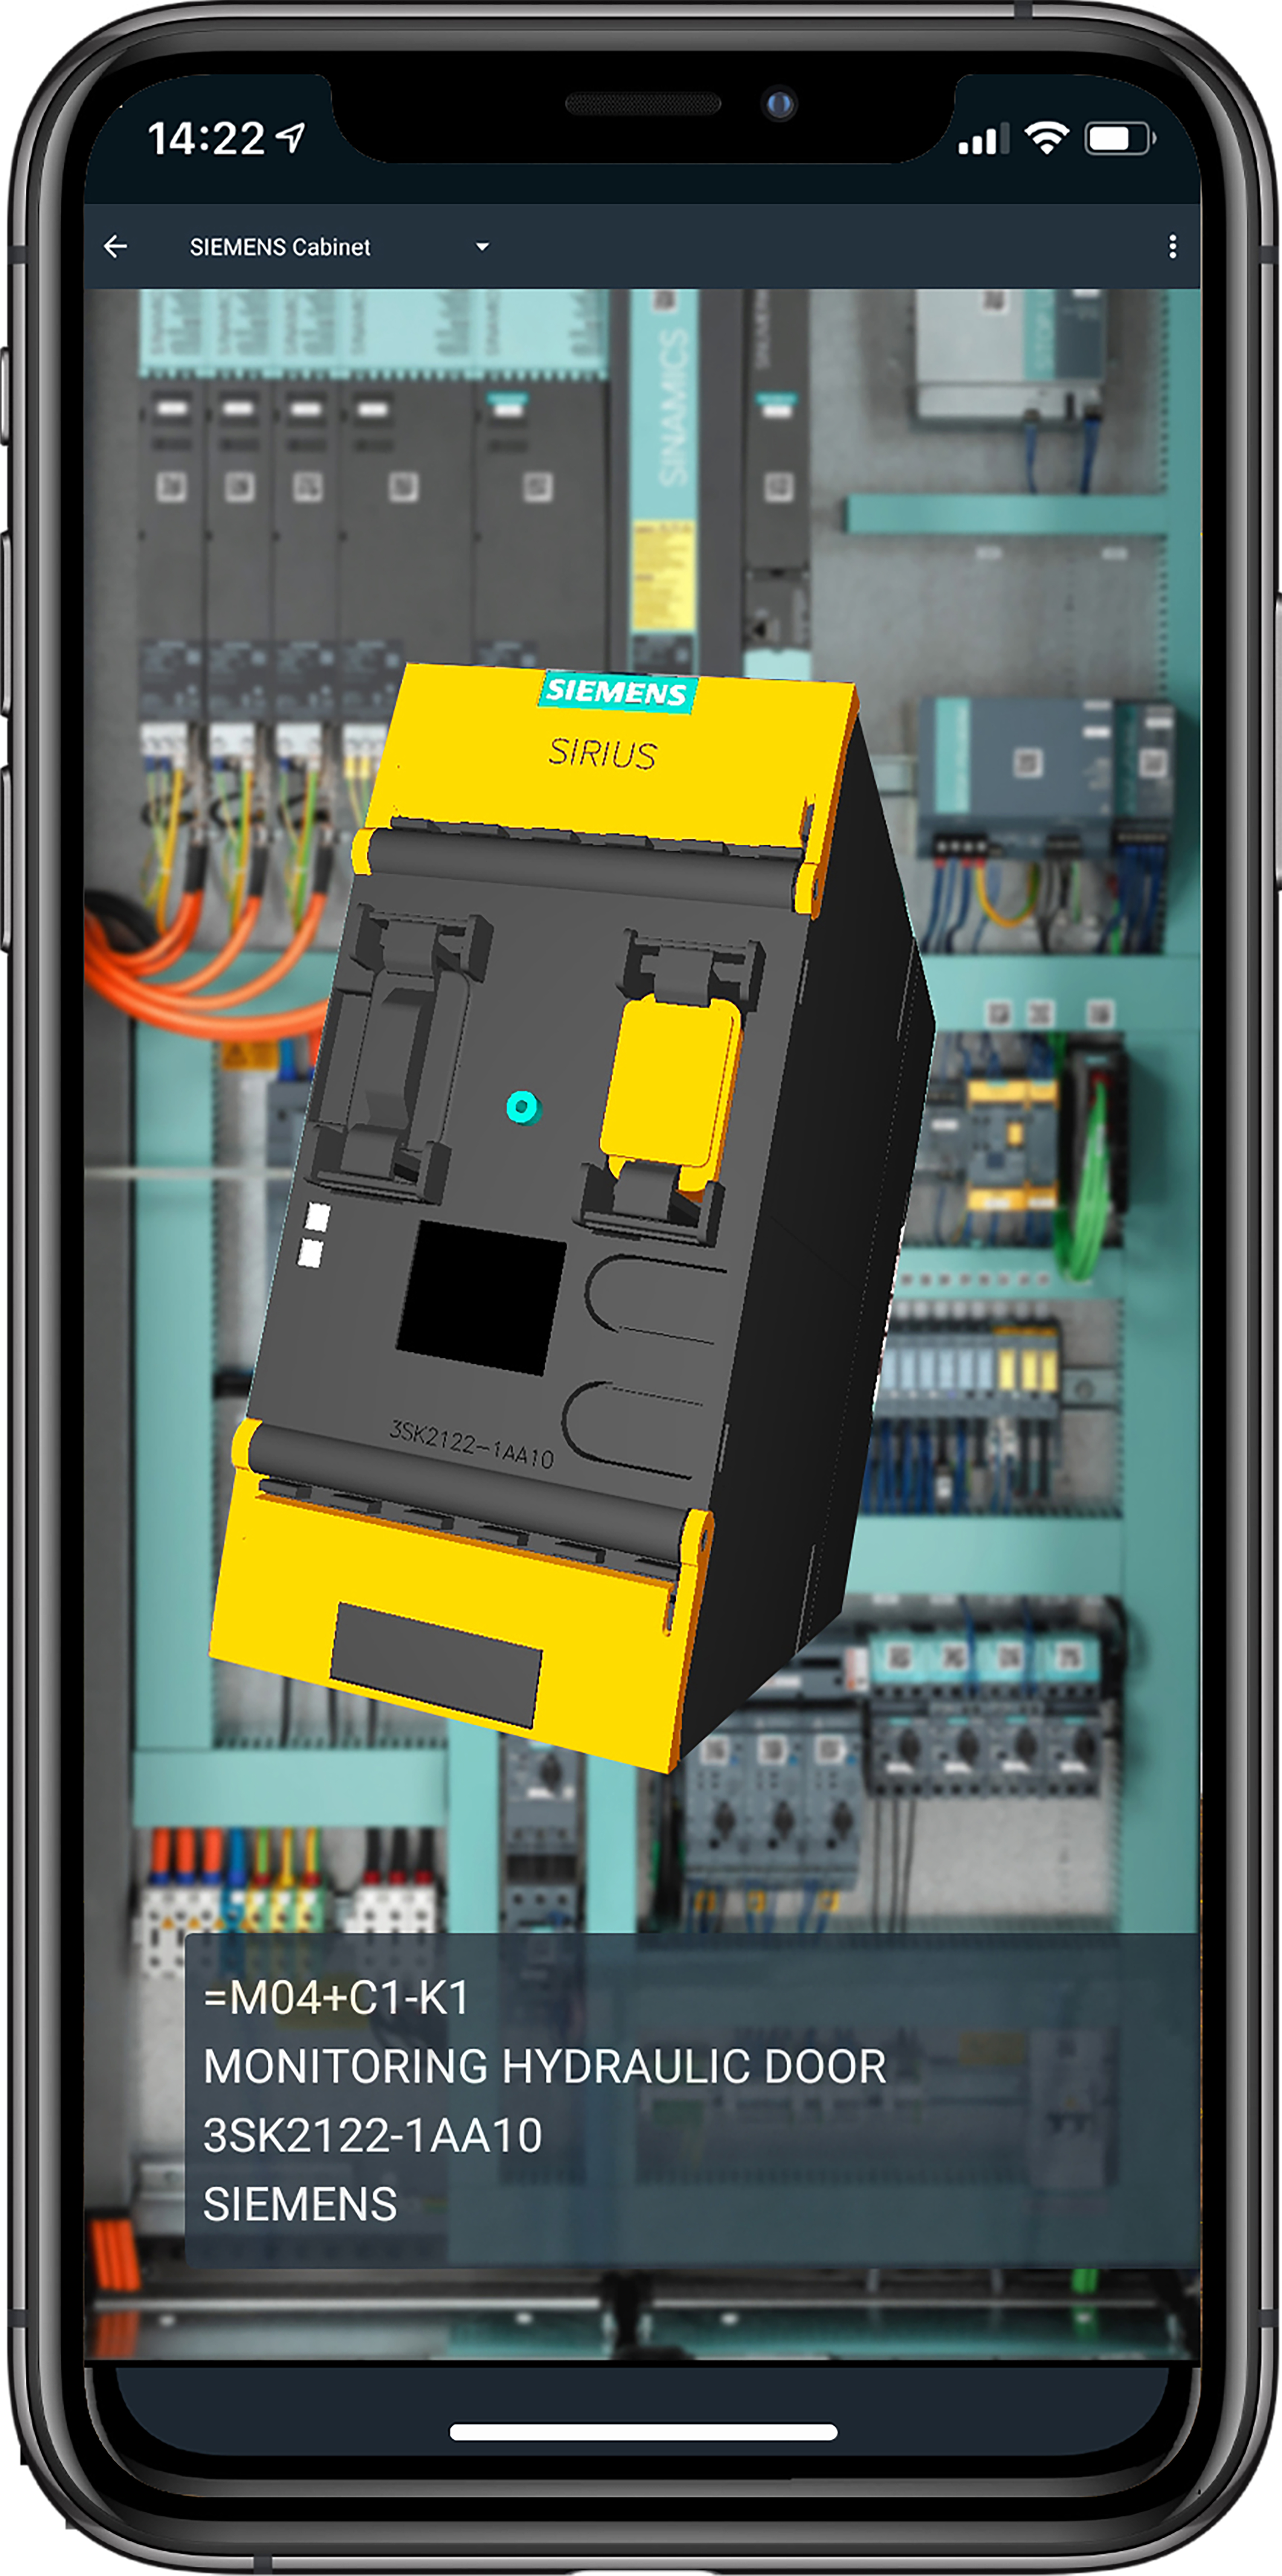 The included WSCAD Cabinet AR App identifies components and retrieves information from the Cloud. Notes on components can be added within the Cabinet AR App using the comment function.